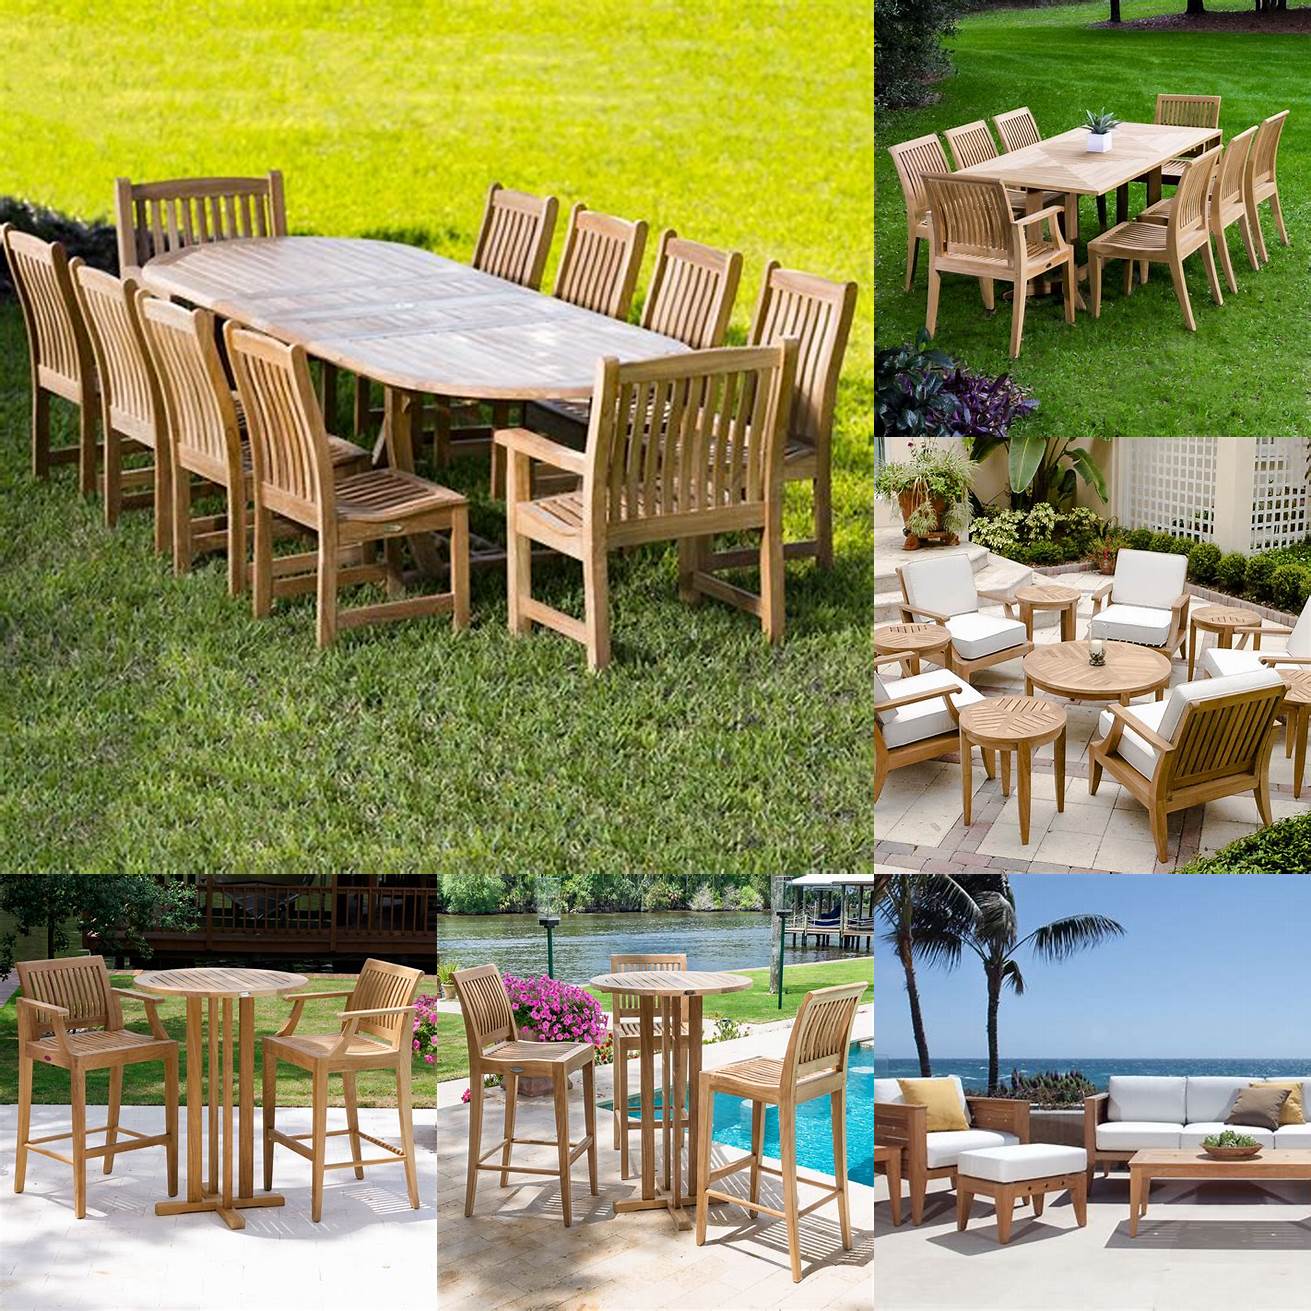 An example of a Westminster Teak Furniture piece being used outdoors